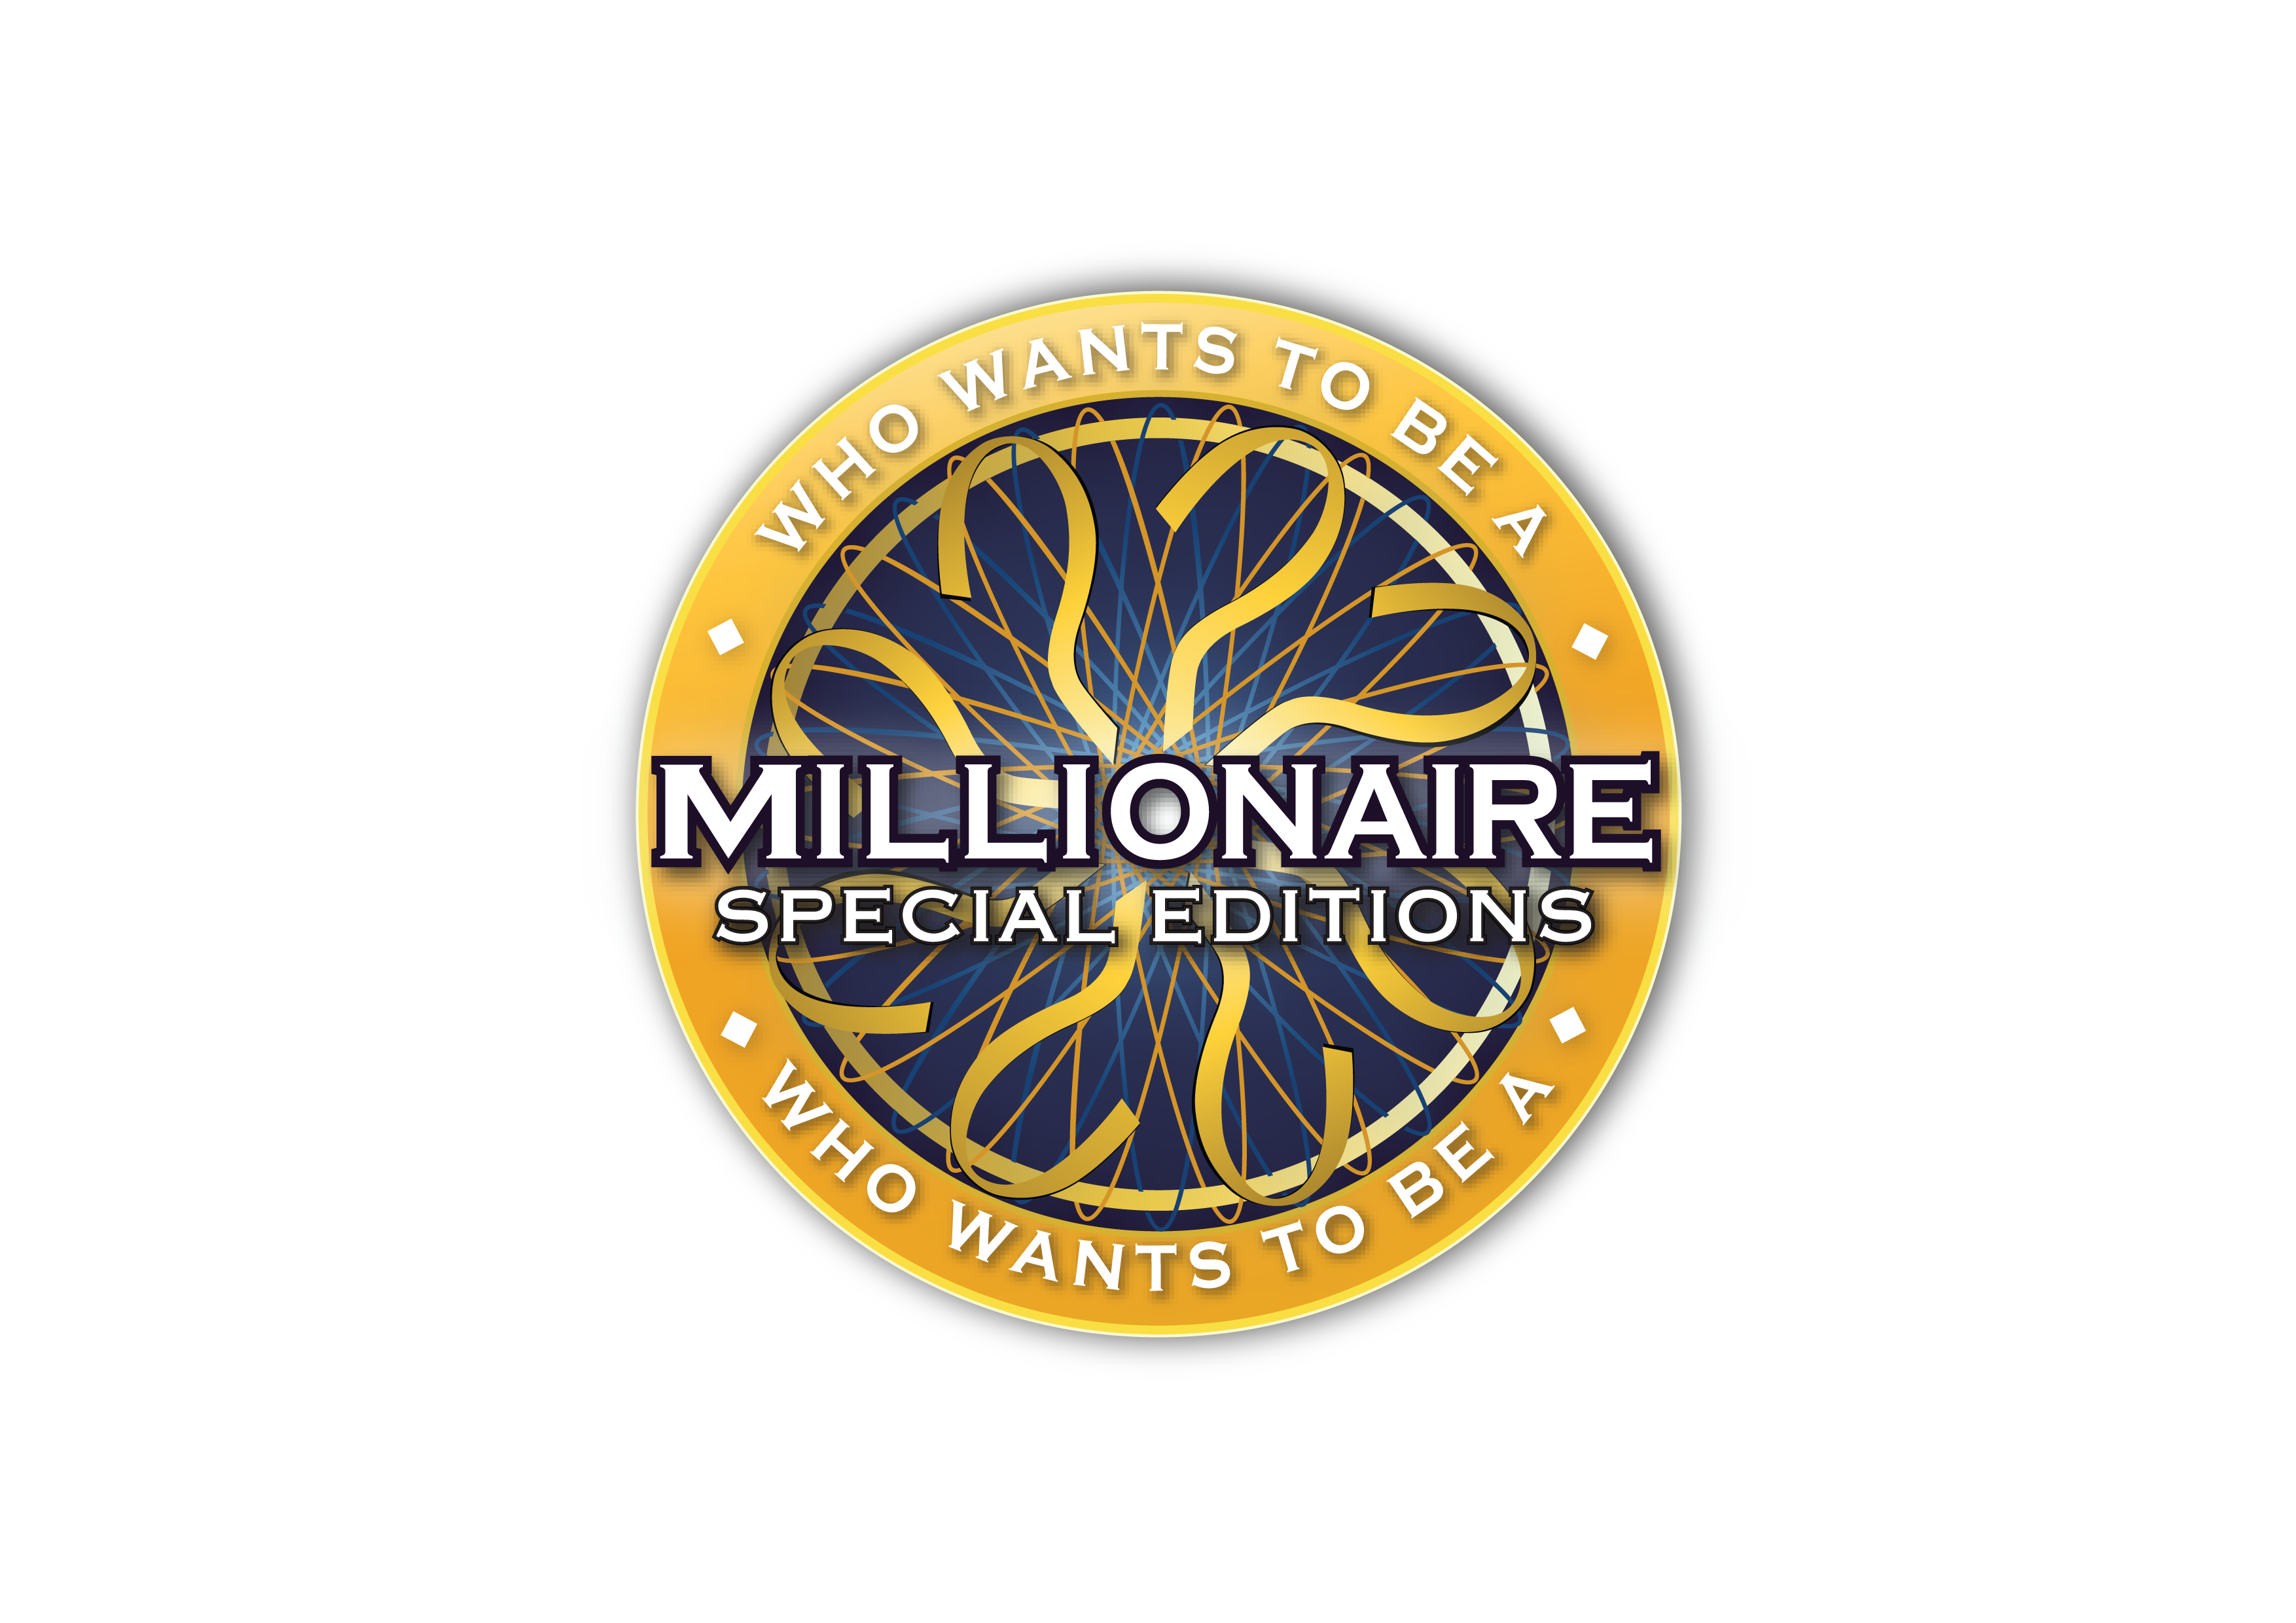 Who wants to be the to my. Миллионер лого. Who wants to be a Millionaire Special Editions русская версия. Логотип миллионер игра.